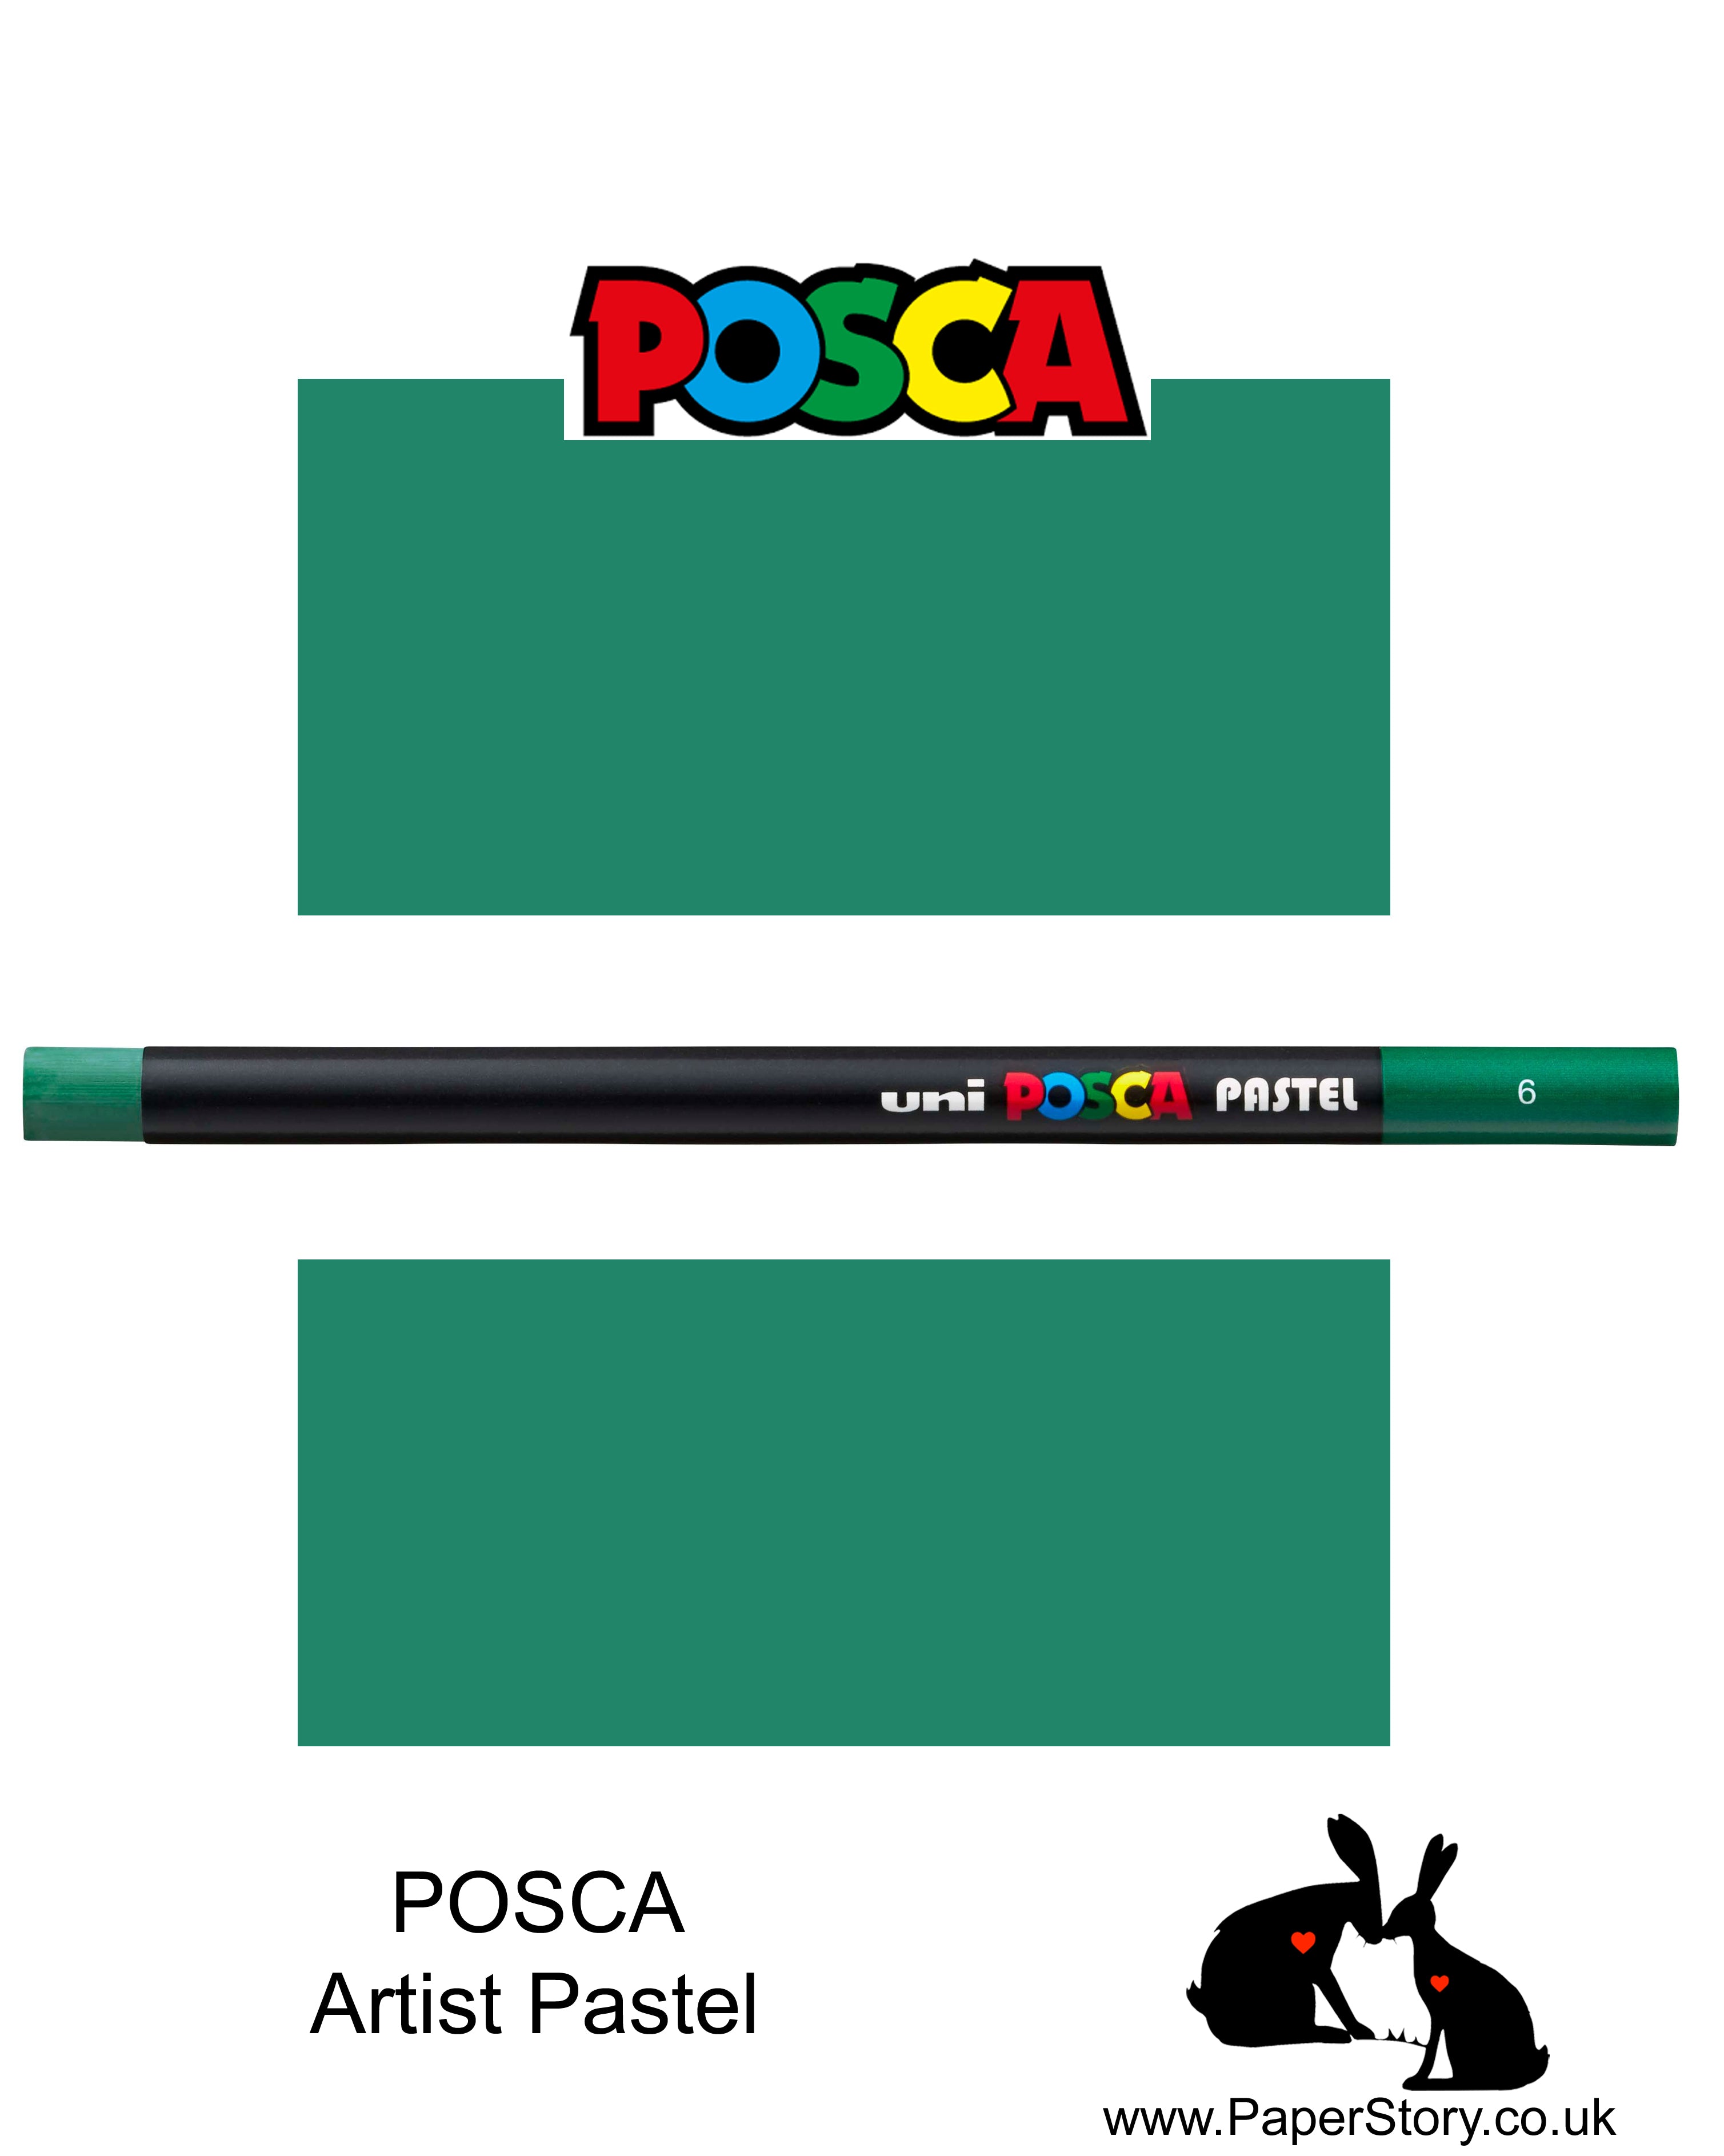 New Uni POSCA Pastels,Green colour these  new style wax and oil mixed pastel colours can be blended and overlaid, you can stipple, colour block, cross-hatch, scratch and outline. You can heat the sticks to create textured effects.